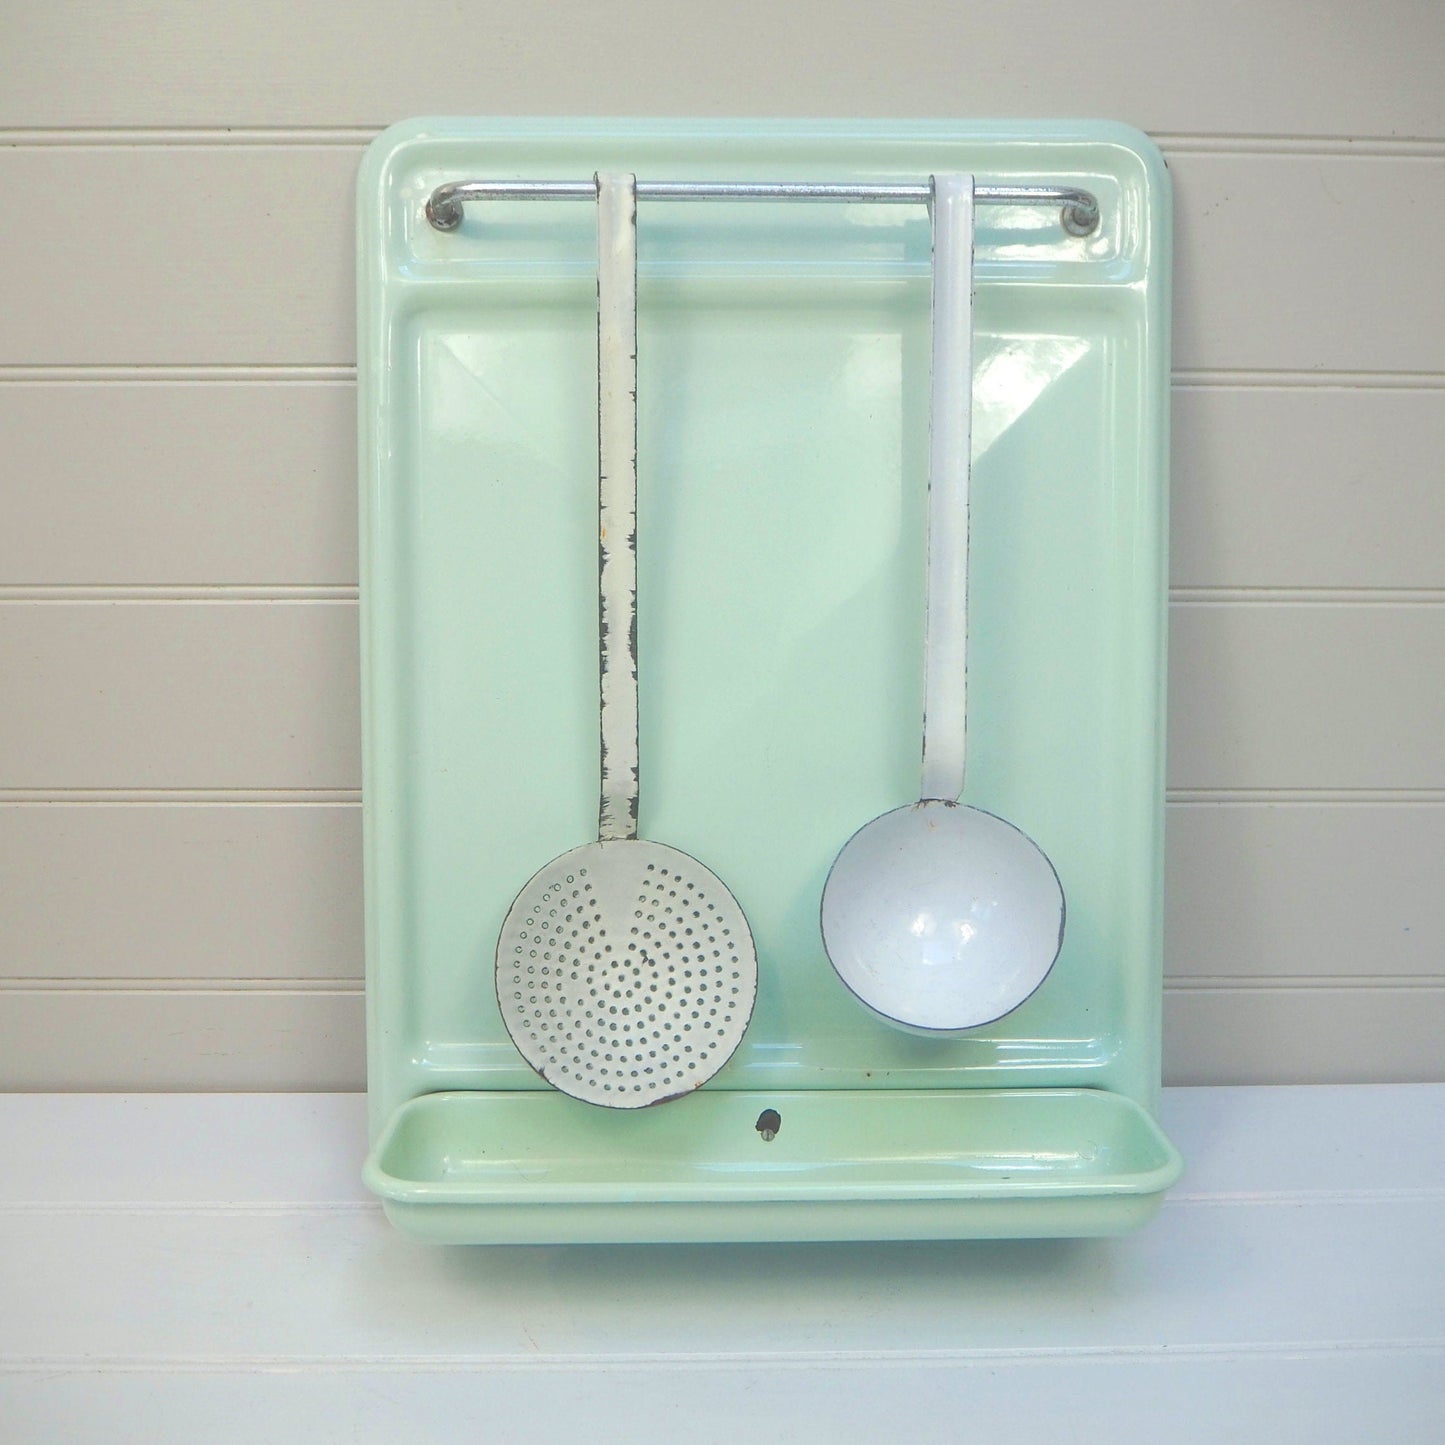 Vintage French enamel kitchen rack with 2 utensils Rare pale green wall rack Hanger Rack Drip Tray Spoon rack Hanging rail 1950s Compact